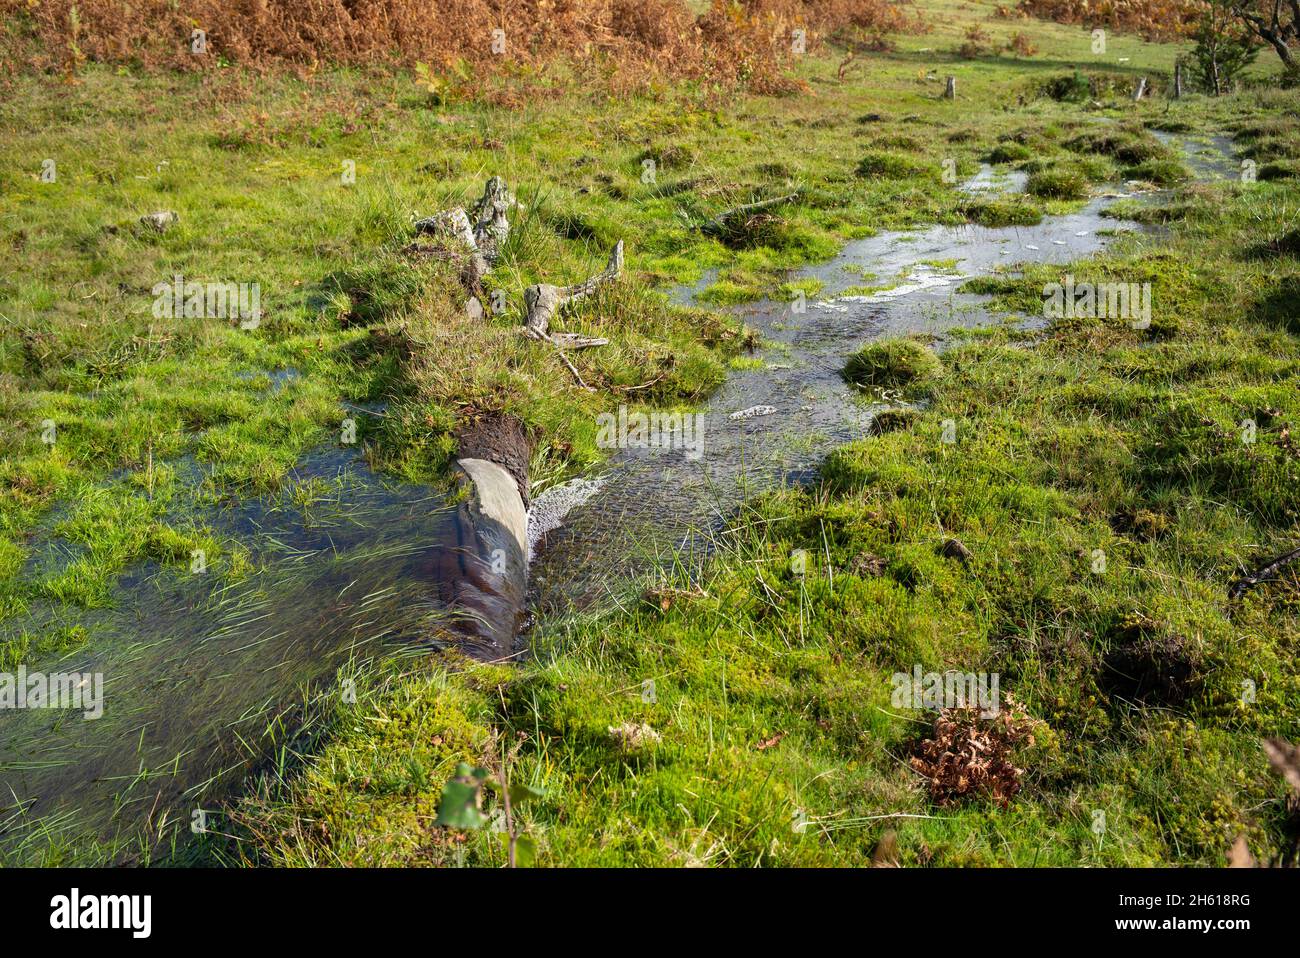 Conservation work to form natural streams within The New Forest Hampshire UK, heathland mires and wet grasslands helps wildlife and biodiversity. Stock Photo